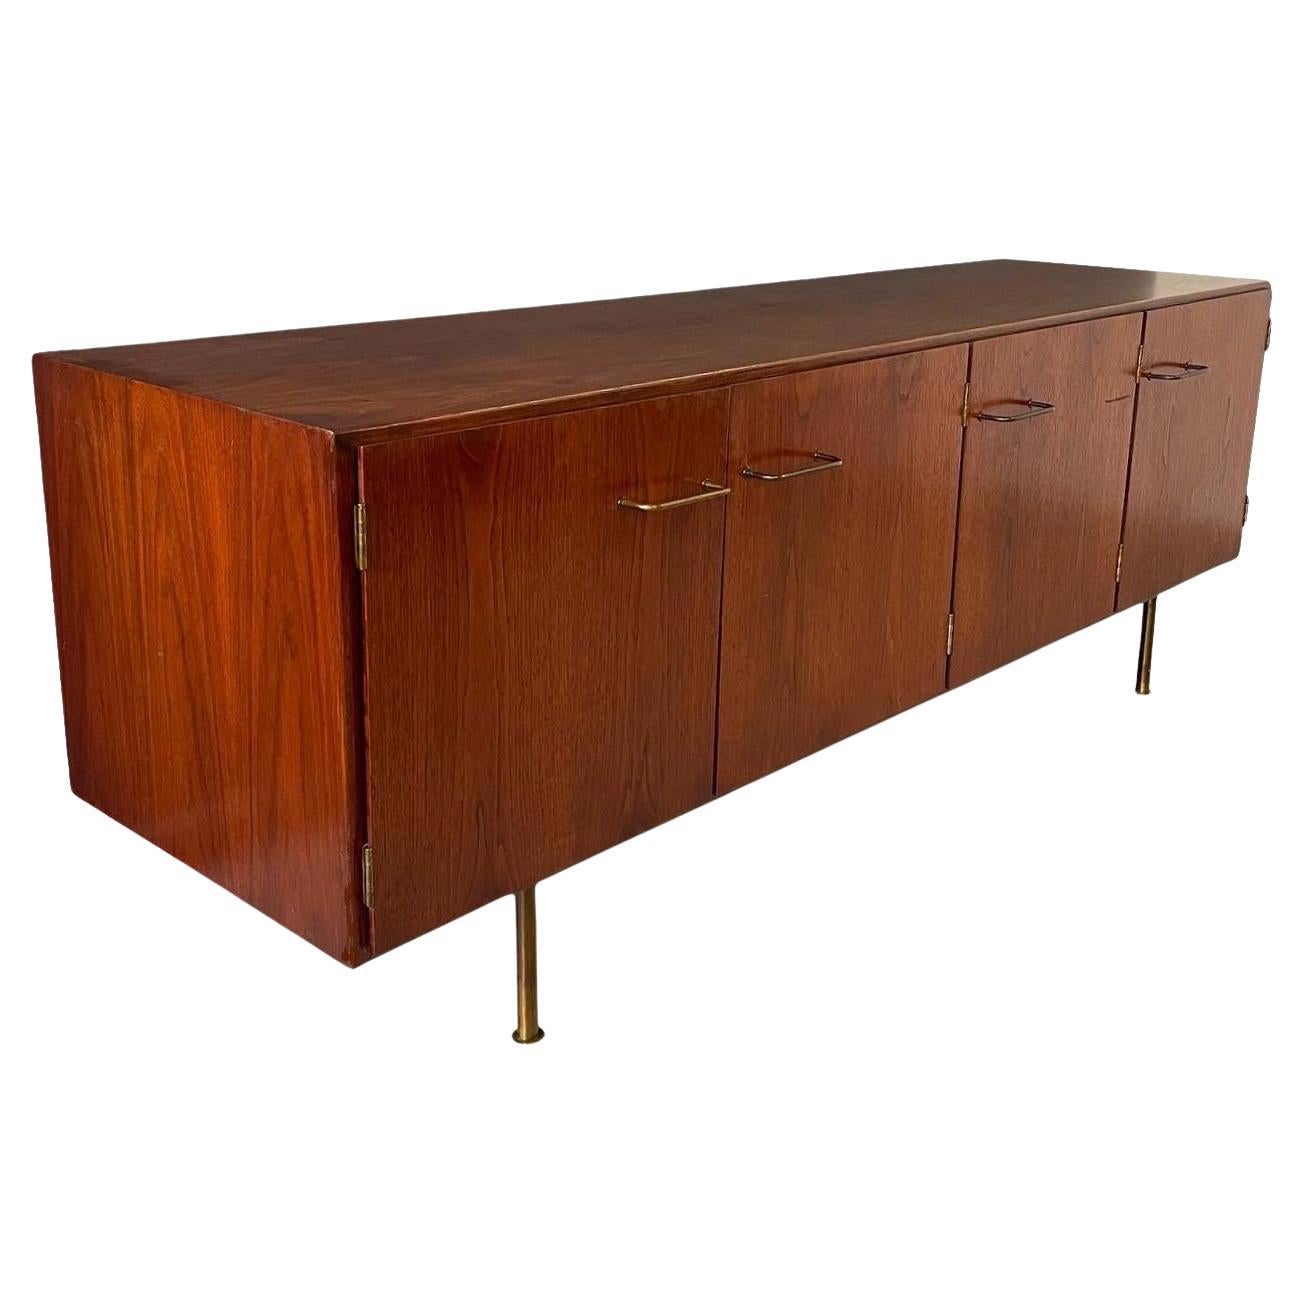 Jens Risom Early Walnut Credenza with Four Doors, Brass Pulls & Legs Mid Century